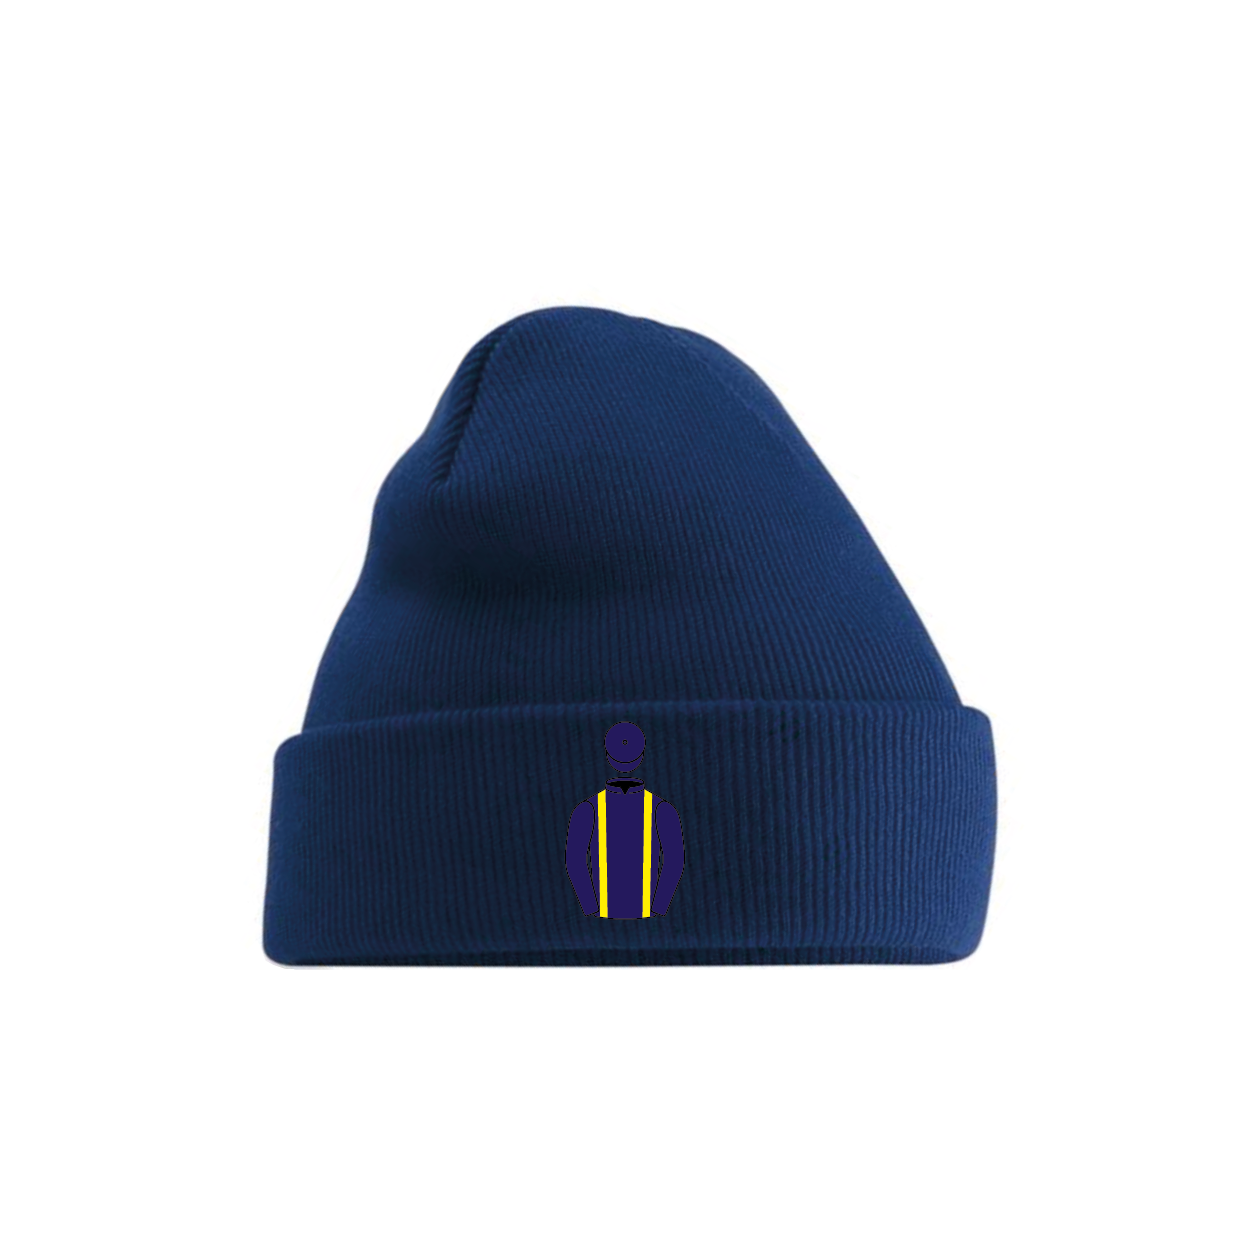 Taylor, Burley And O'Dwyer Embroidered Cuffed Beanie - Hacked Up